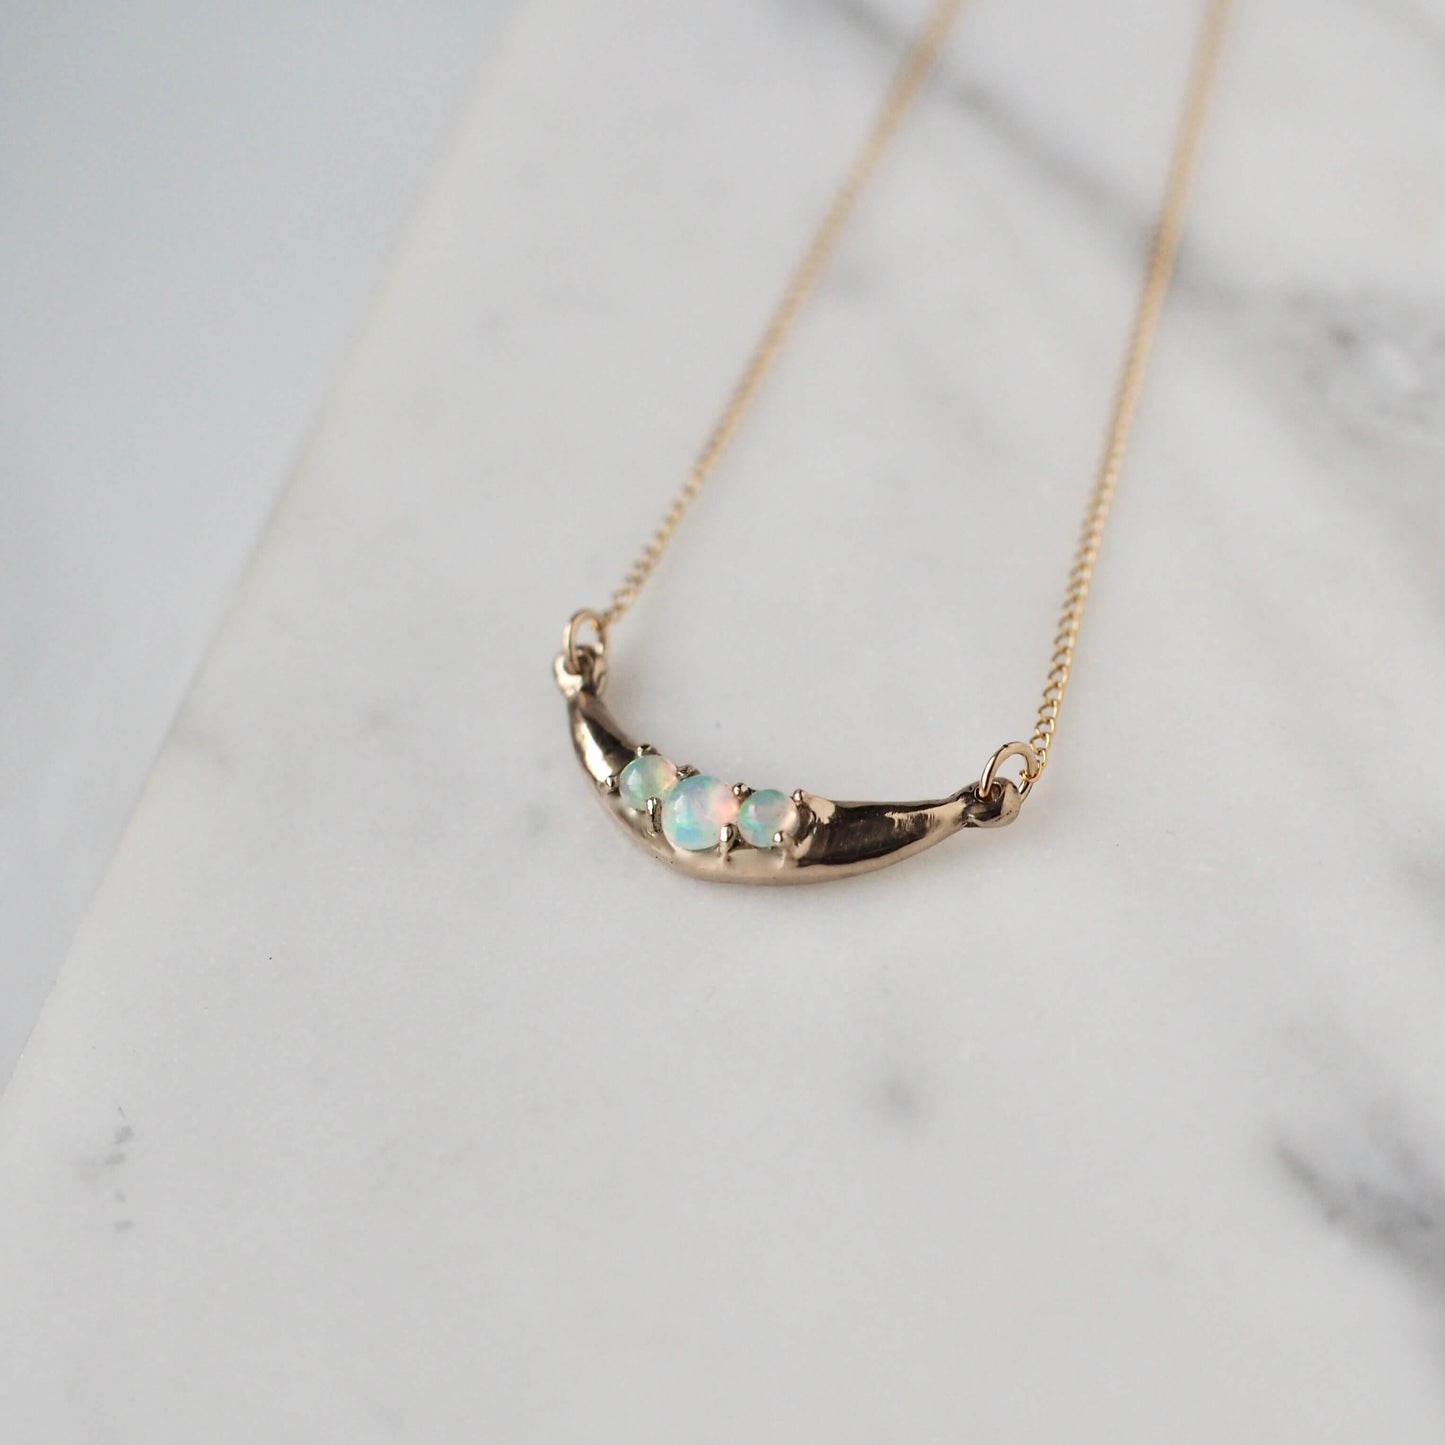 Crescent Moon necklace set with sustainably sourced opals cast in gold tone bronze by Iron Oxide